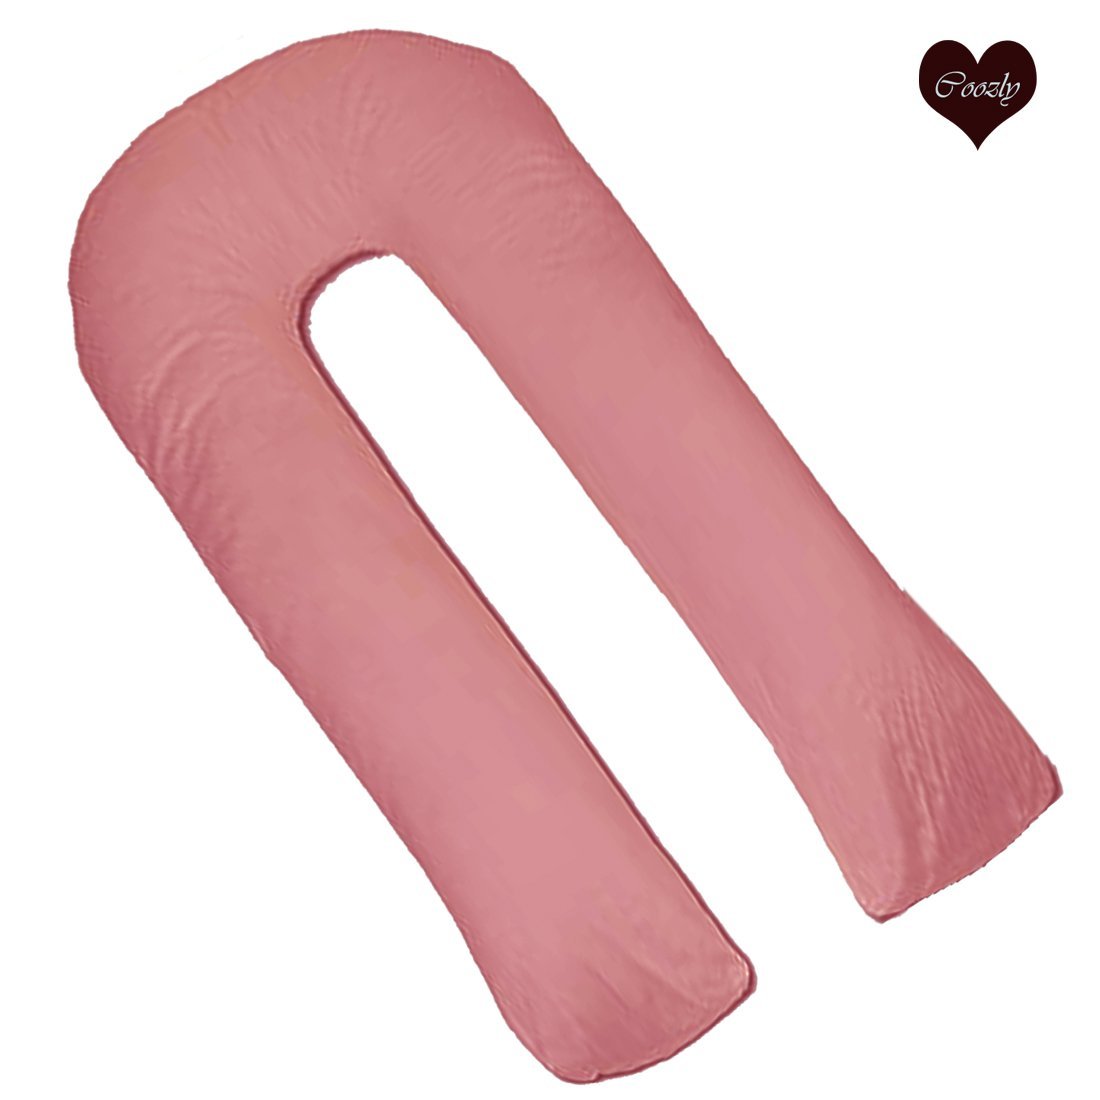 Red-Coozly U Basic Pregnancy Body Pillow